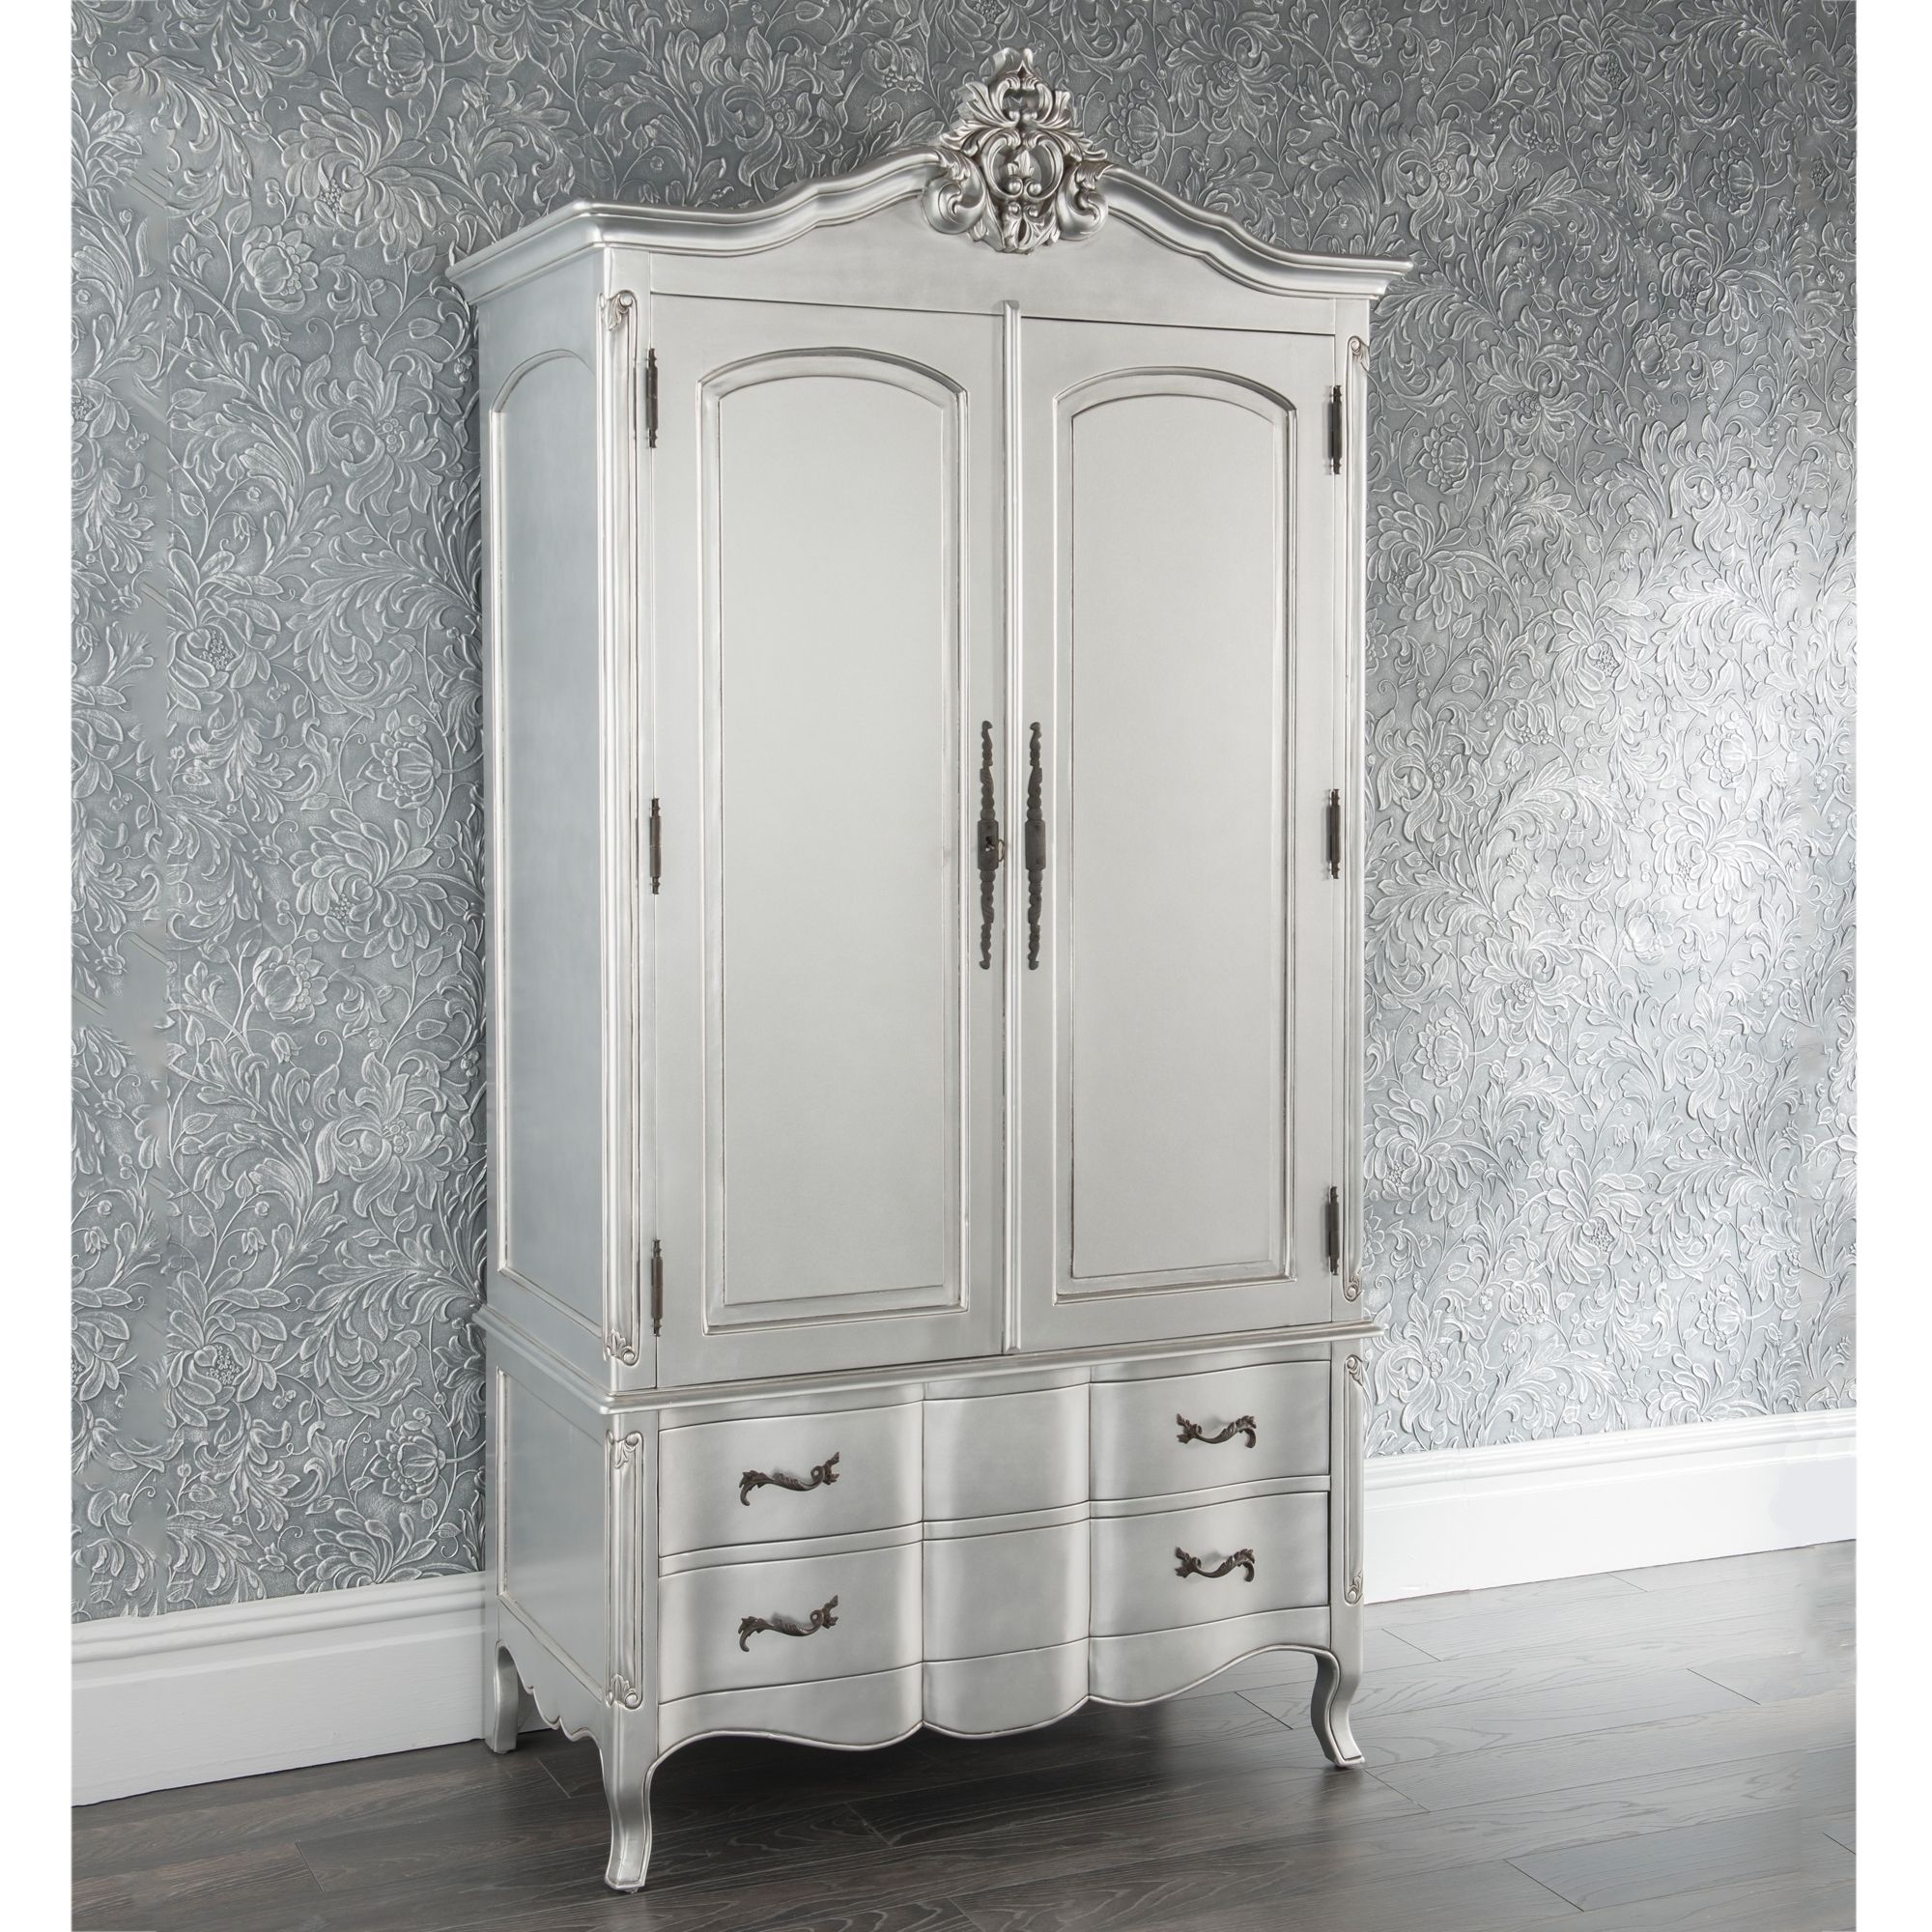 Estelle Antique French Style Wardrobe | French Style Furniture For Silver Wardrobes (View 3 of 20)